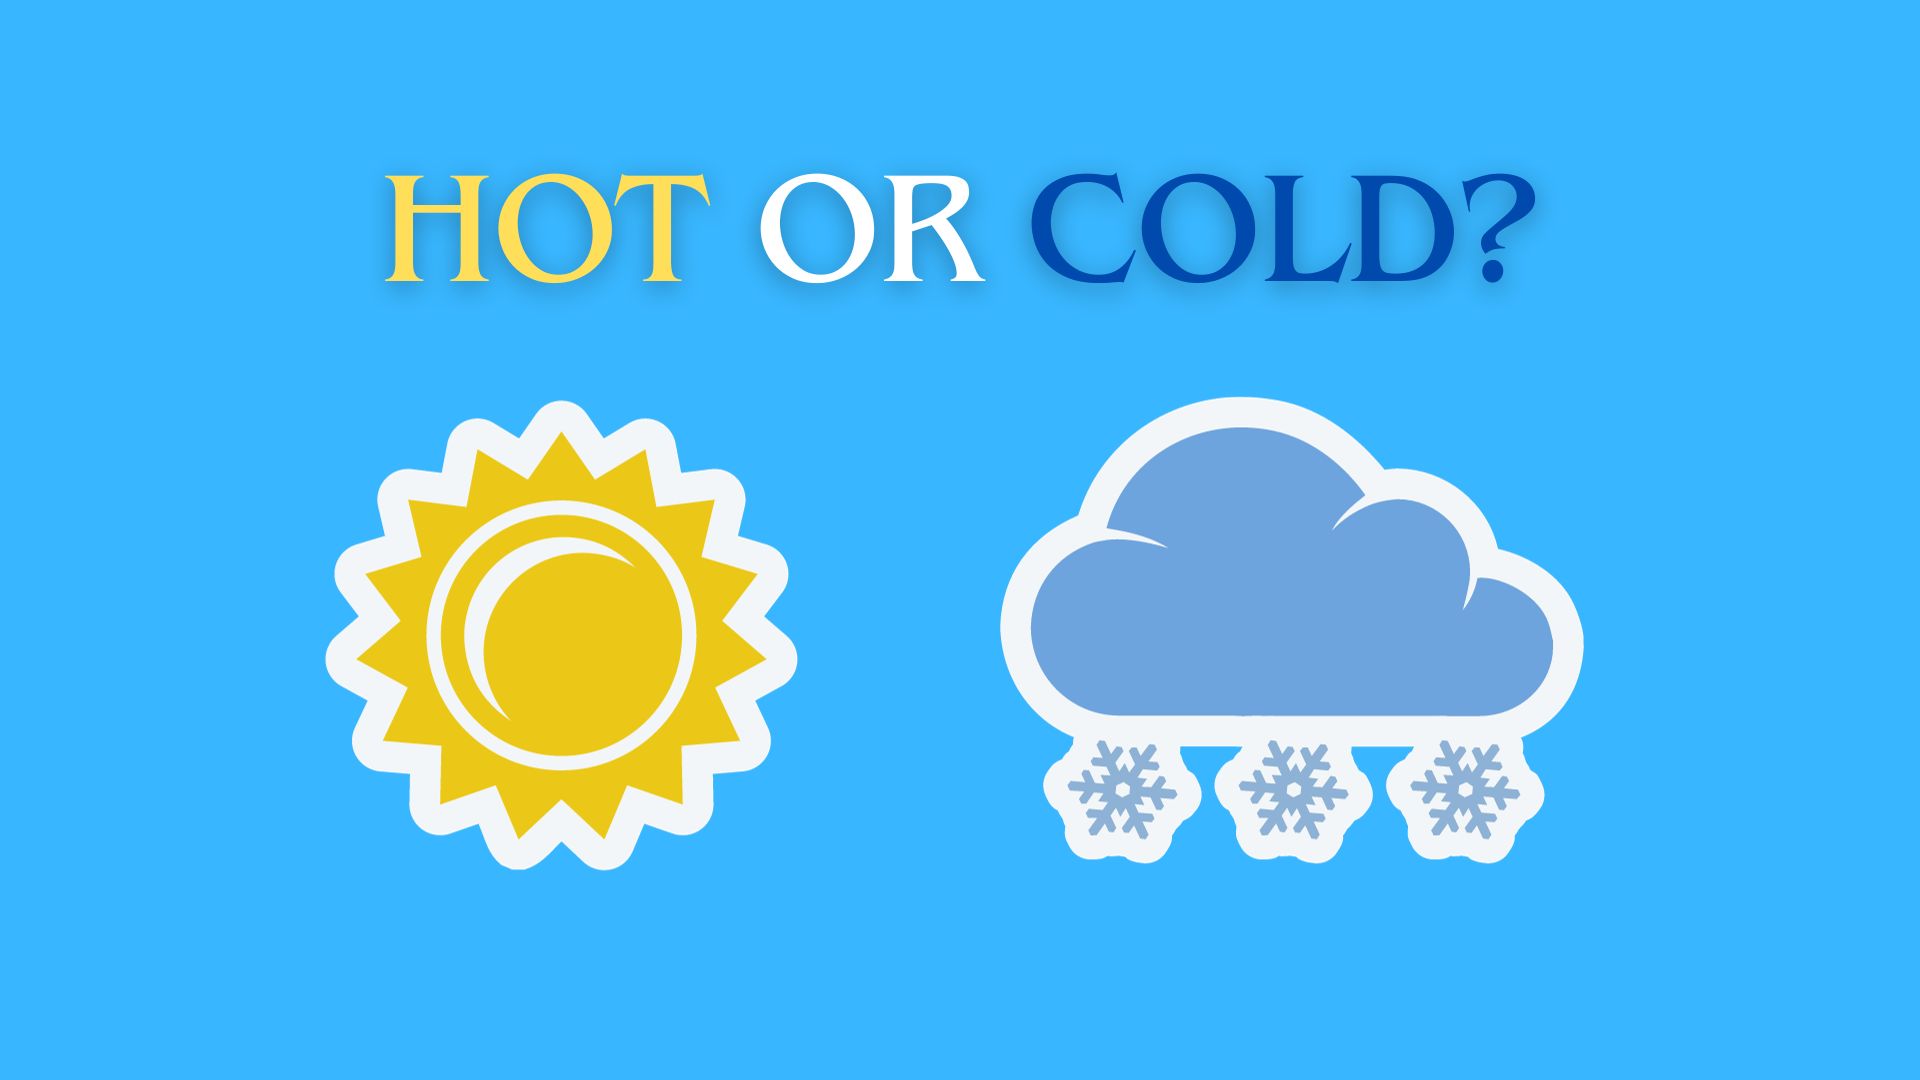 Dilemma: Hot or Cold weather?